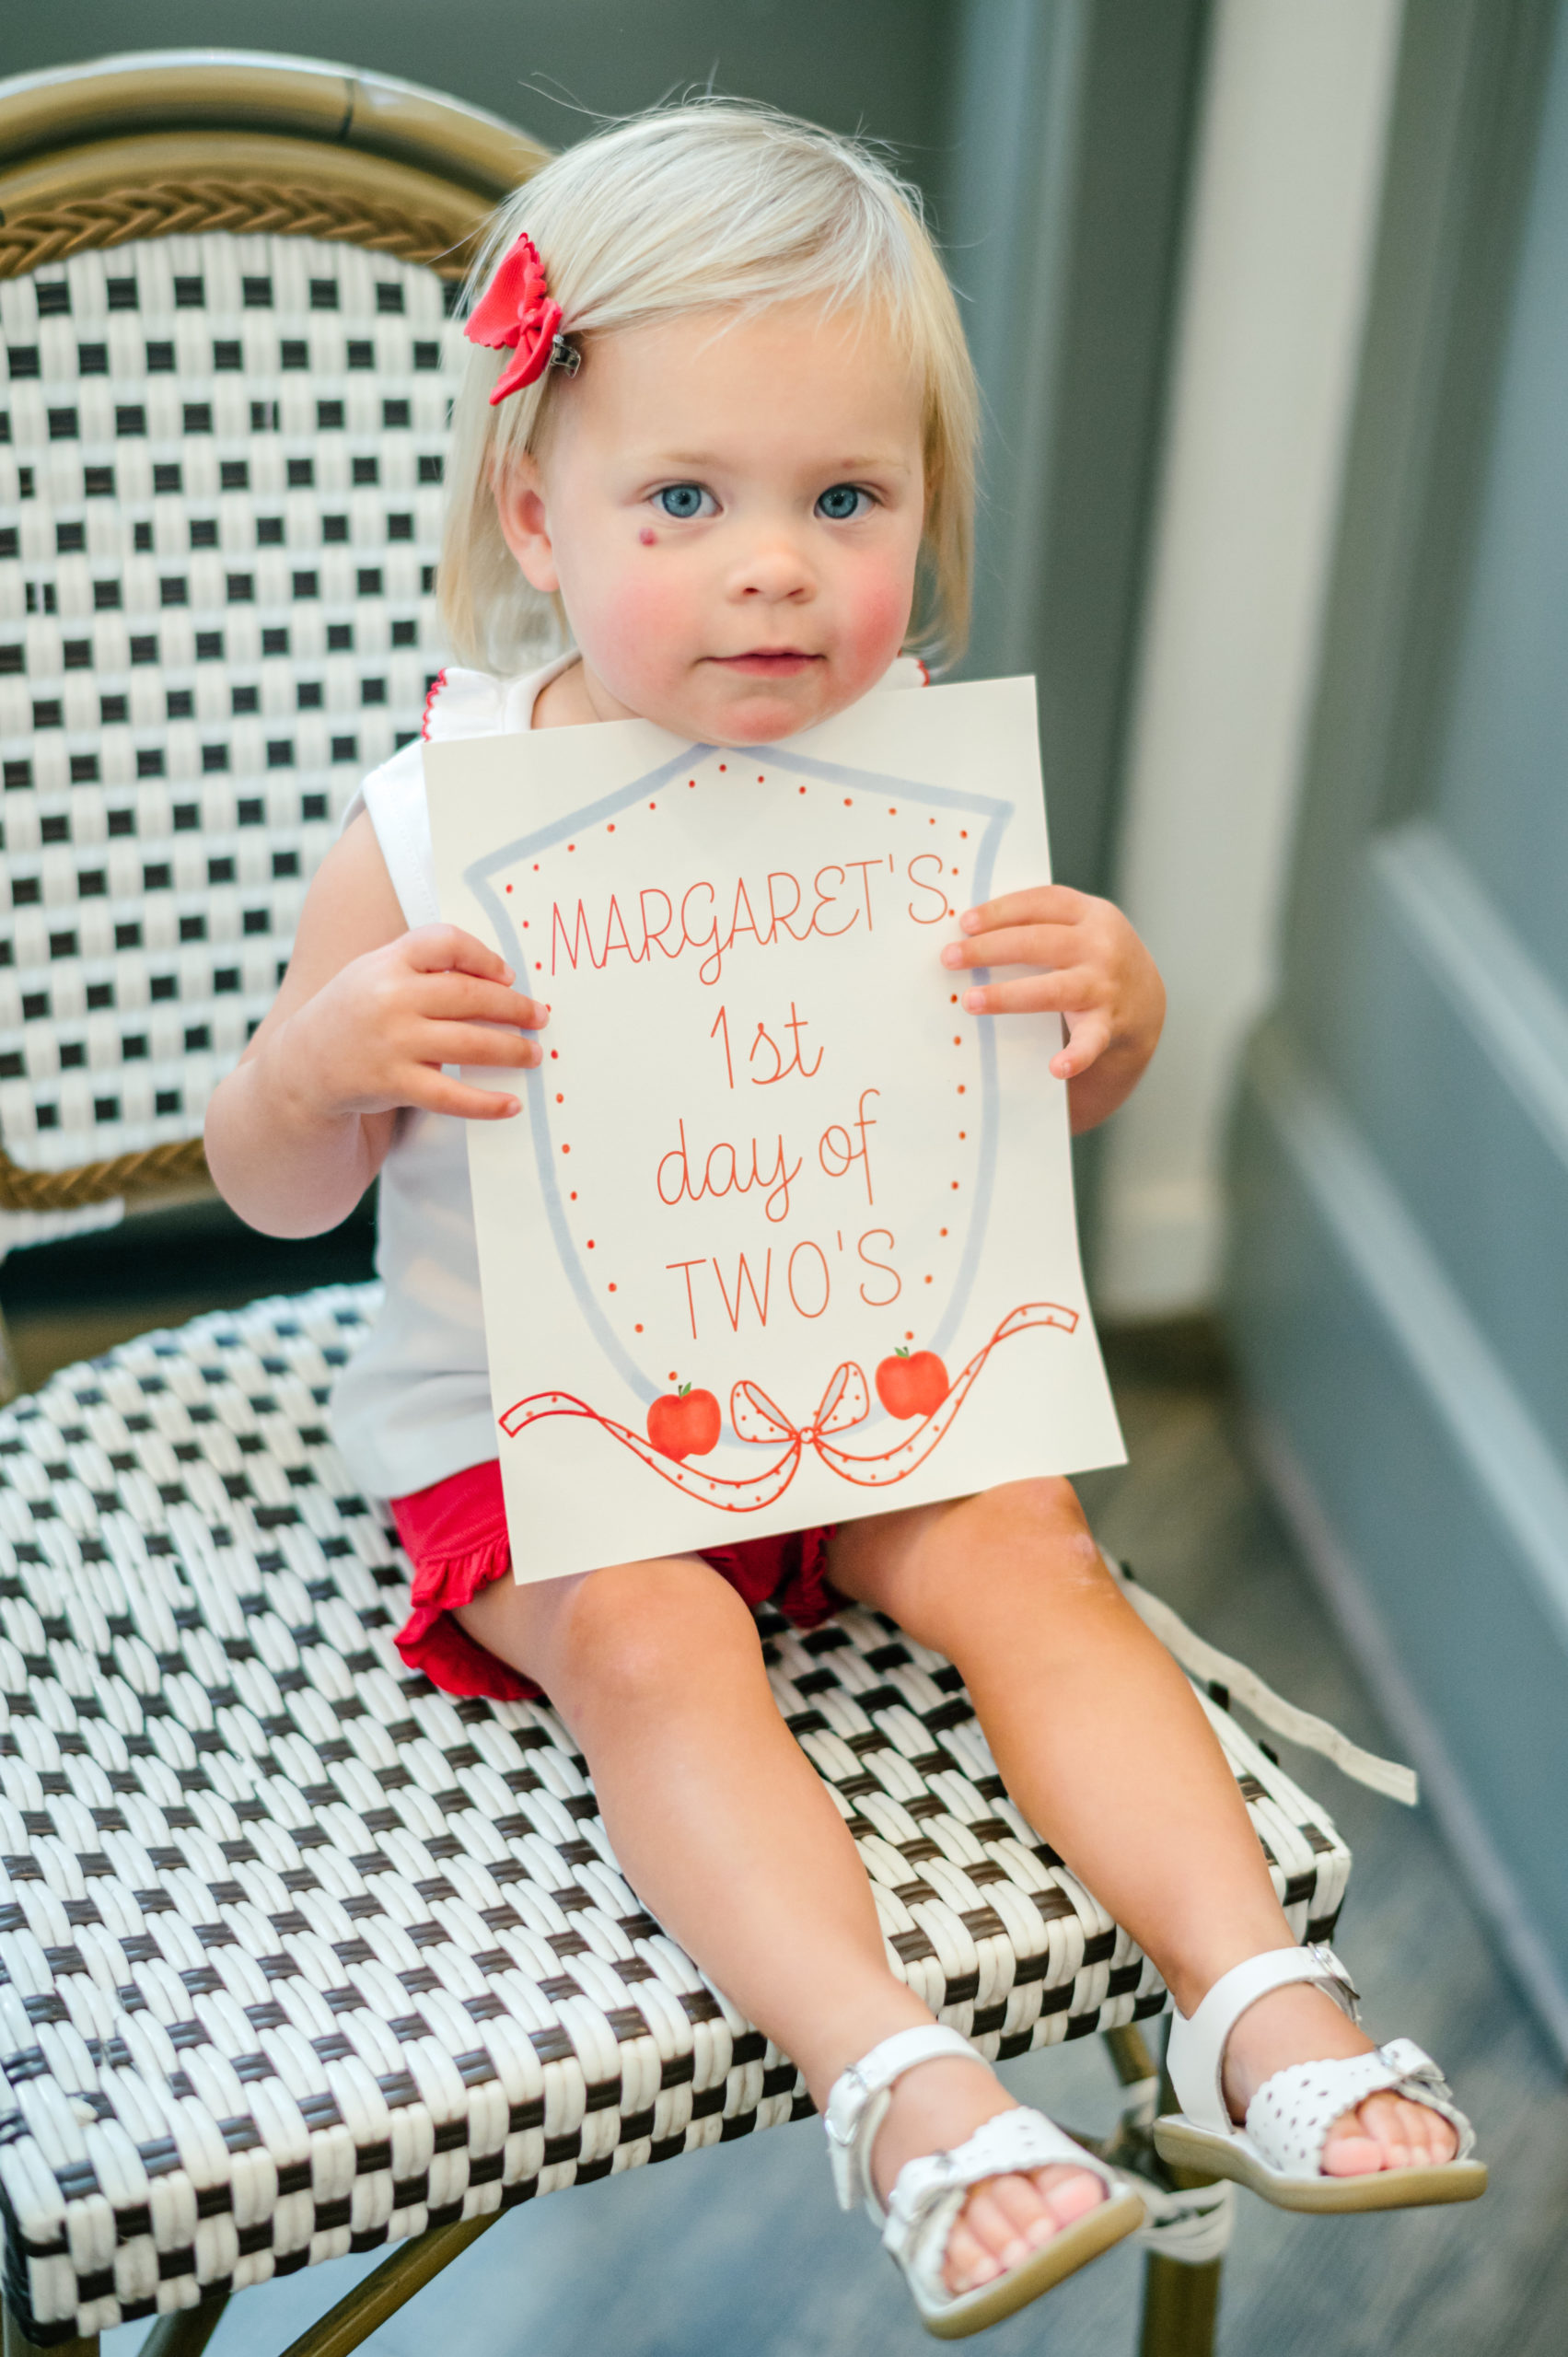 Little girl sitting holding a milestone card labeled "Margaret's 1st day of two's 